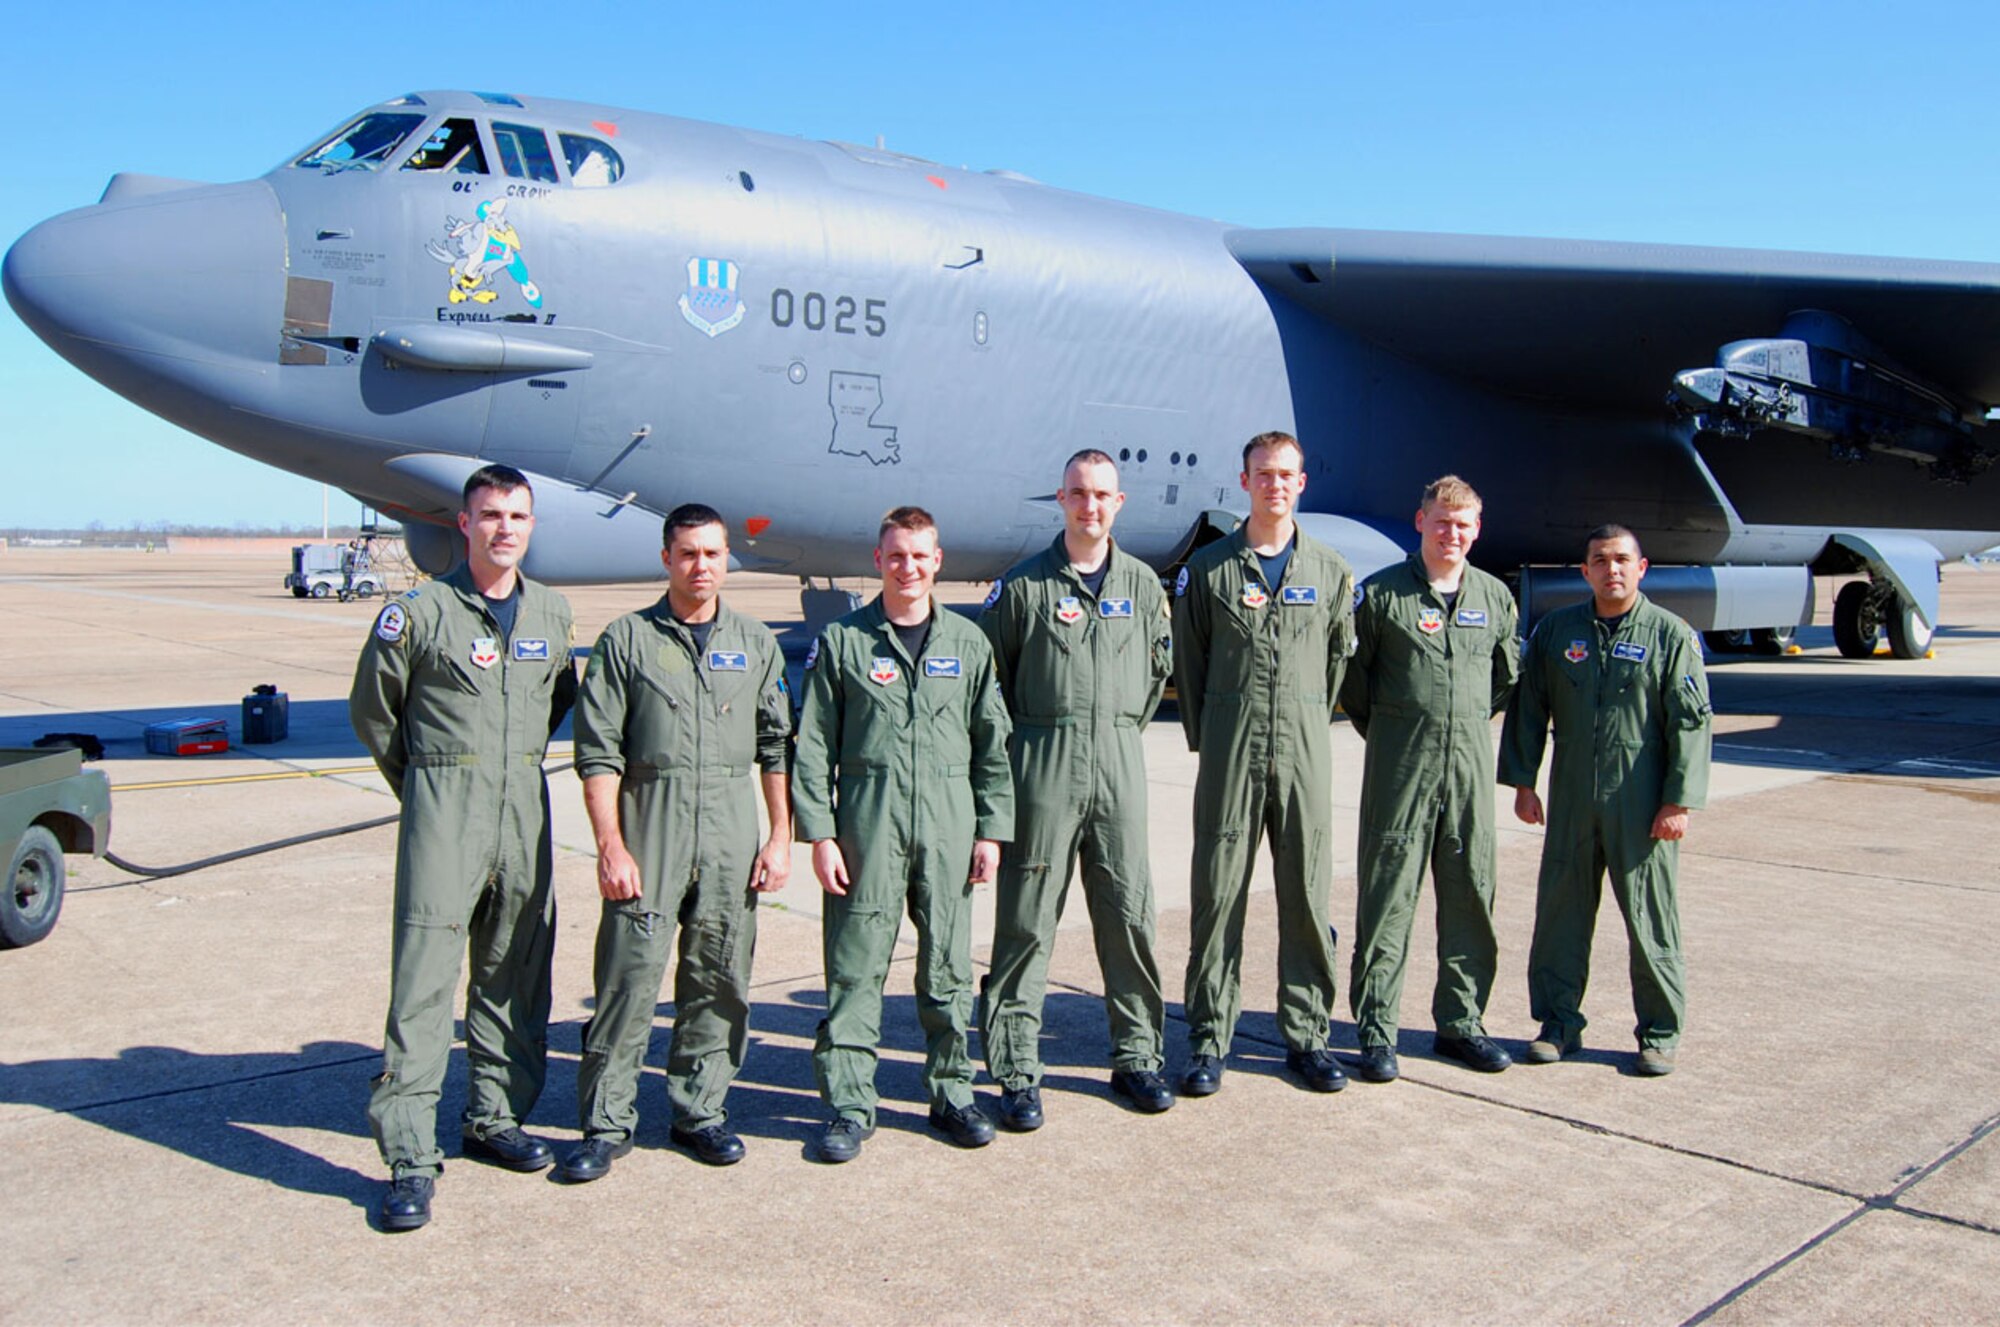 Members of the 20th Bomb Squadron gather in front of a B-52 before flying to Naval Air Station Corpus Christi, Texas, to conduct a B-52 flyover for the Pilot For a Day program Feb. 18. (Courtesy photo)